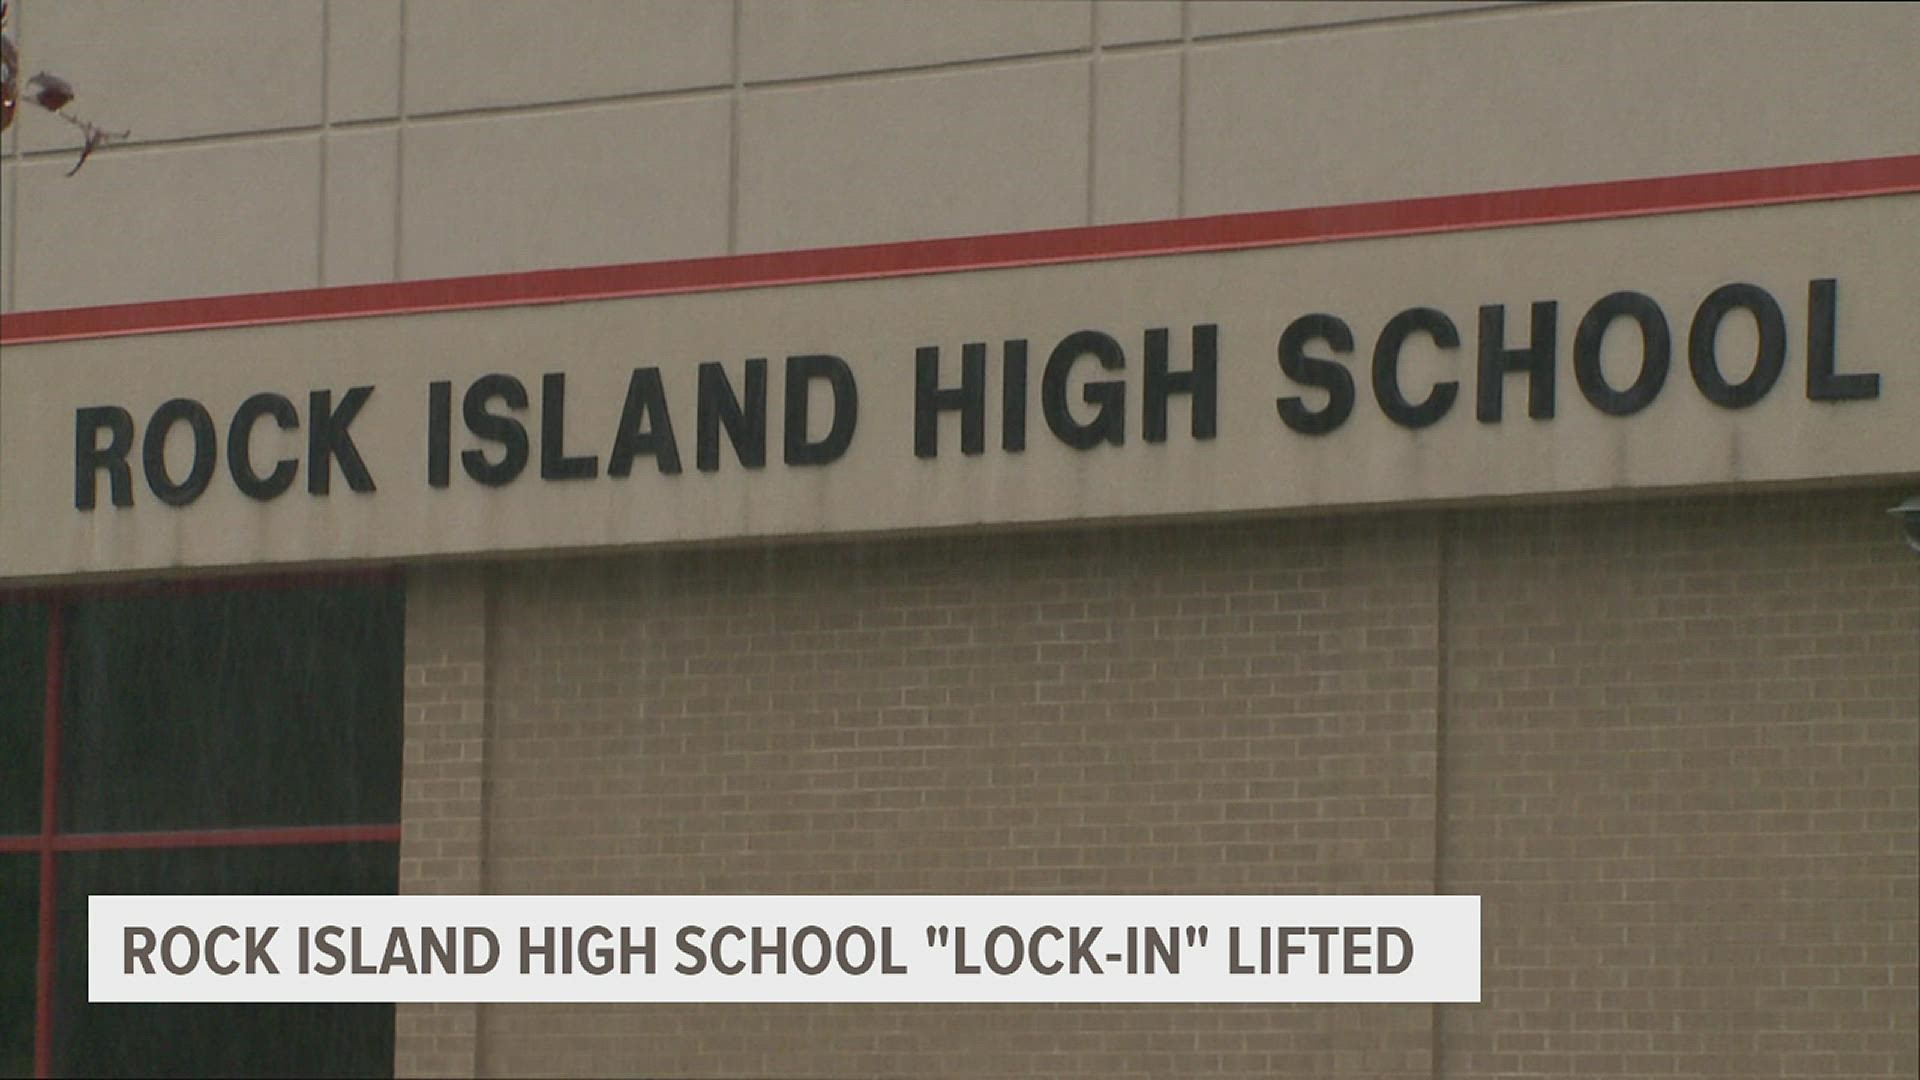 The district placed all buildings under a "lock-in status" at 10:48 a.m. Wednesday. The incident was deemed not-threatening following an investigation.